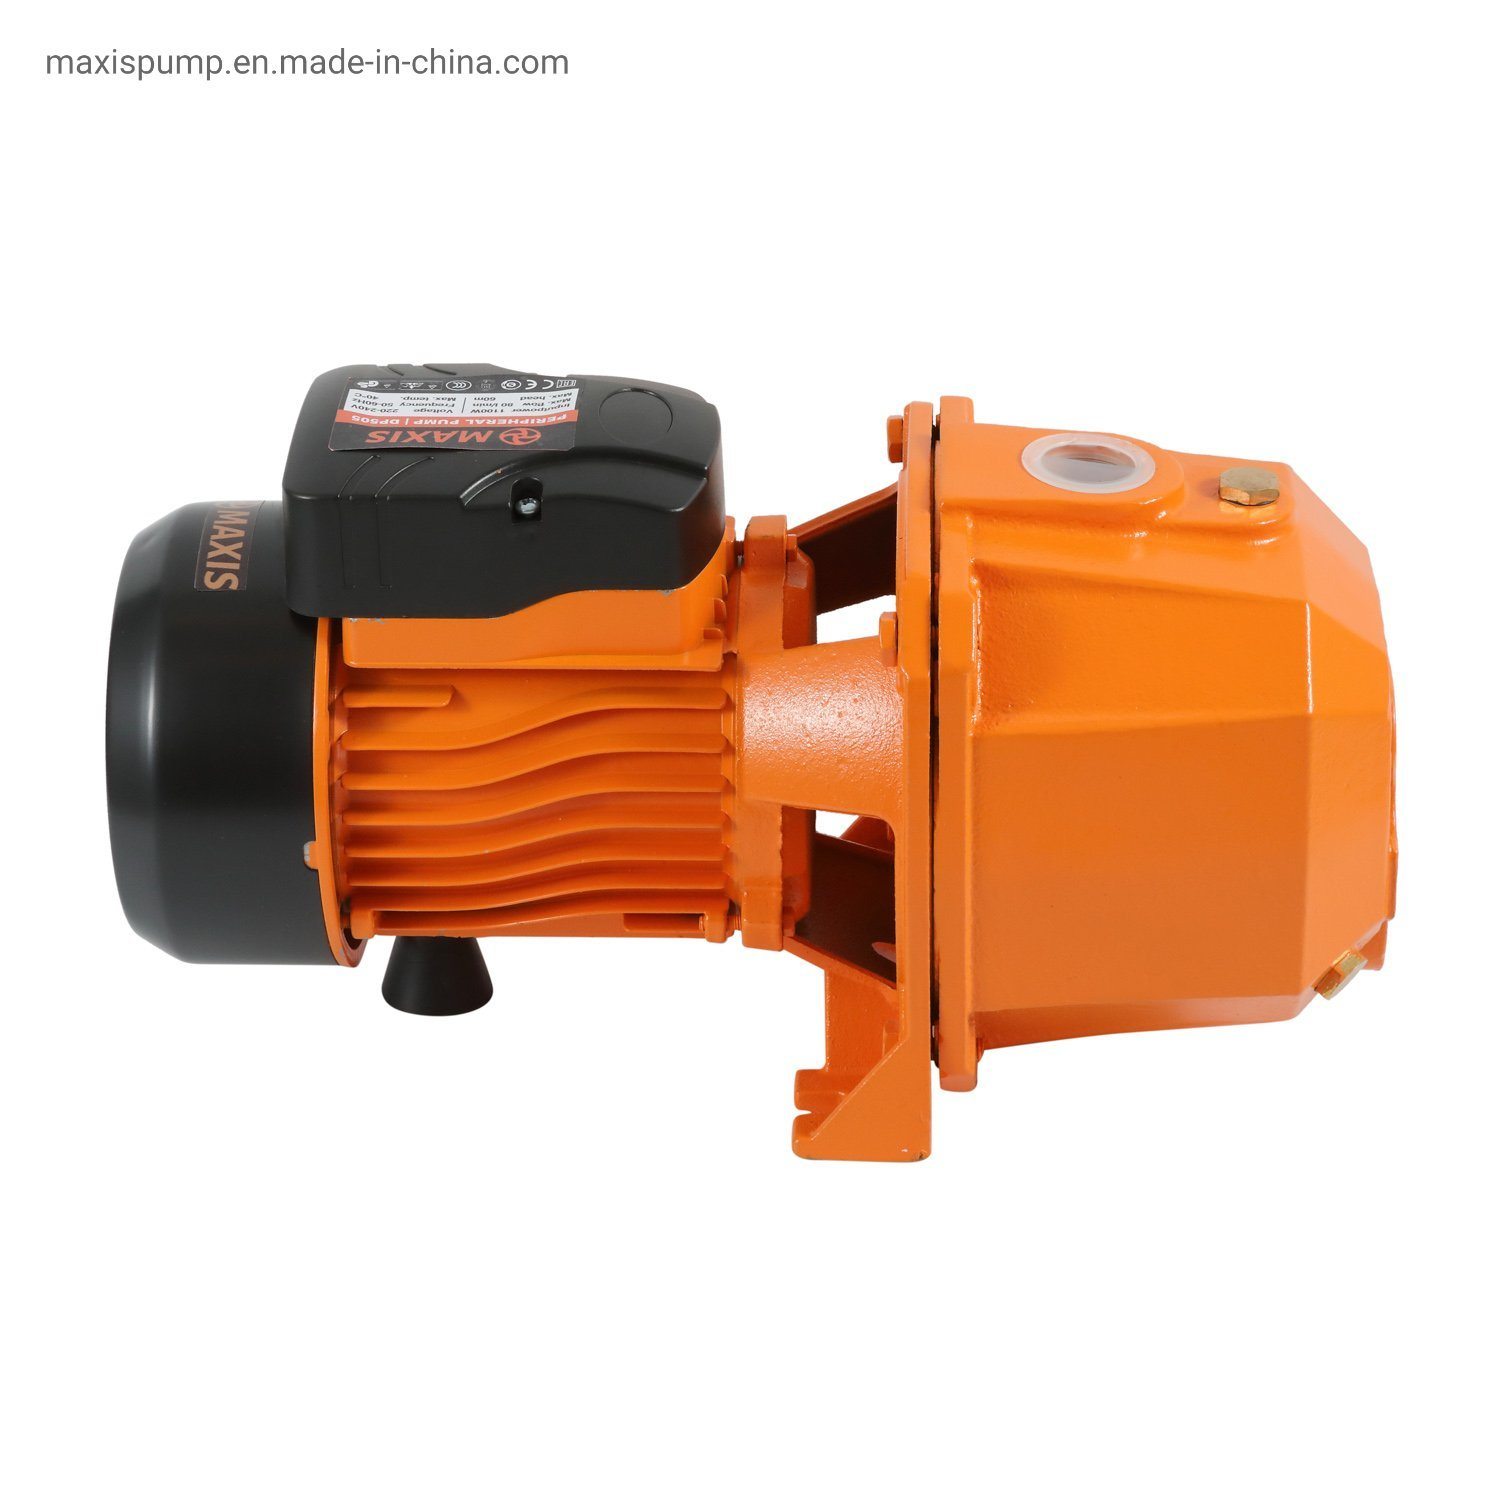 High Quality High Pressure Maxis Jet Self-Priming Pump for Pressuring Home